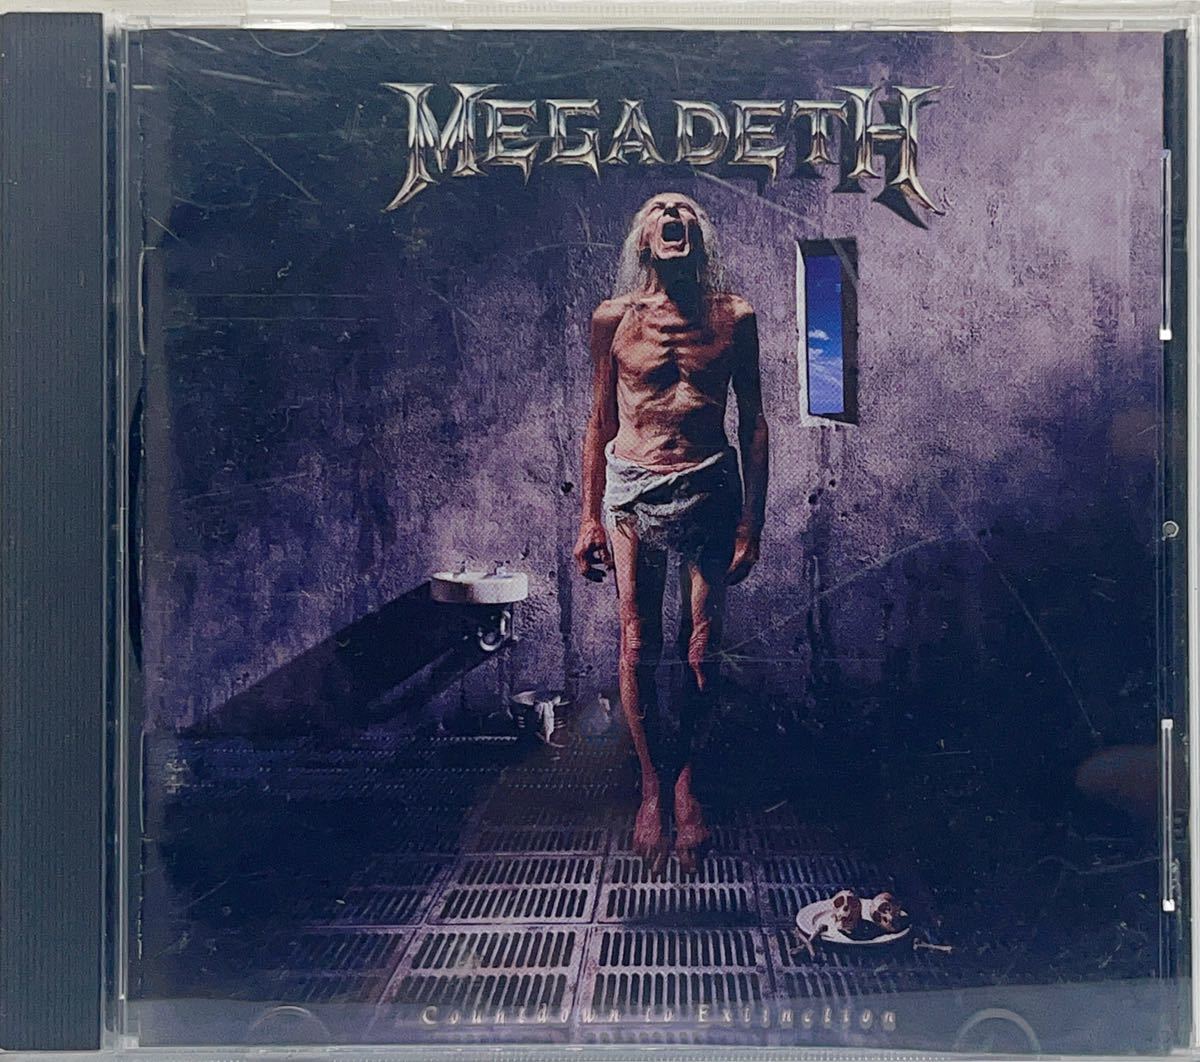 CD * MEGADETH * COUNTDOWN TO EXTINCTION * 1992 year * foreign record secondhand goods 